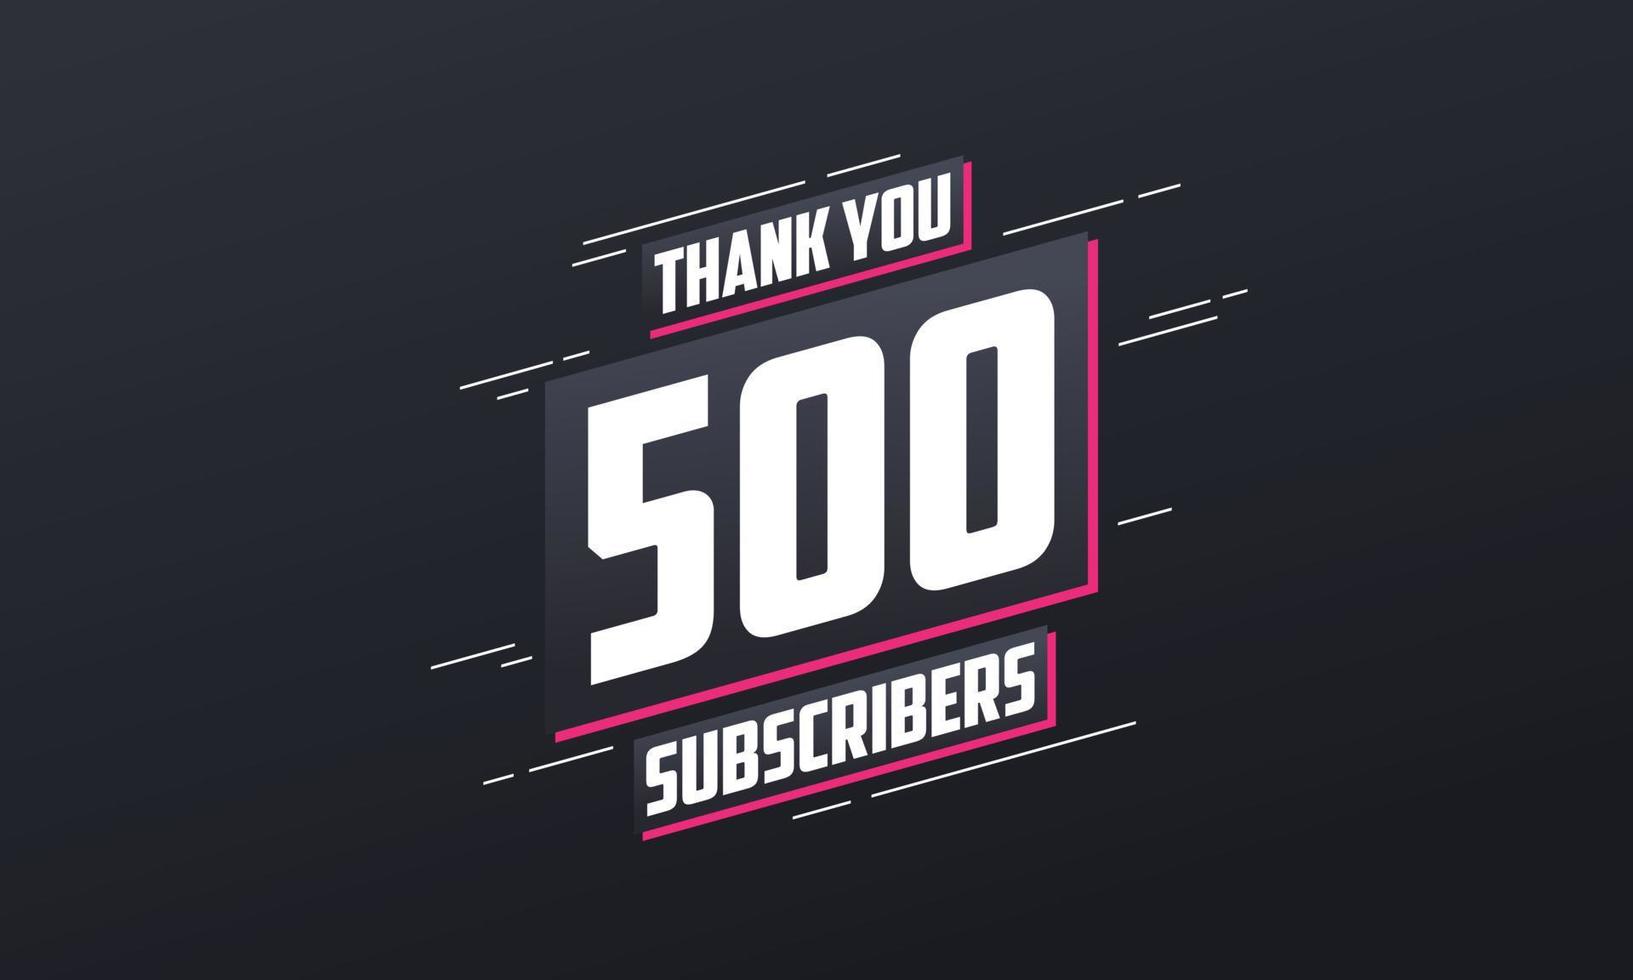 Thank you 500 subscribers 500 subscribers celebration. vector